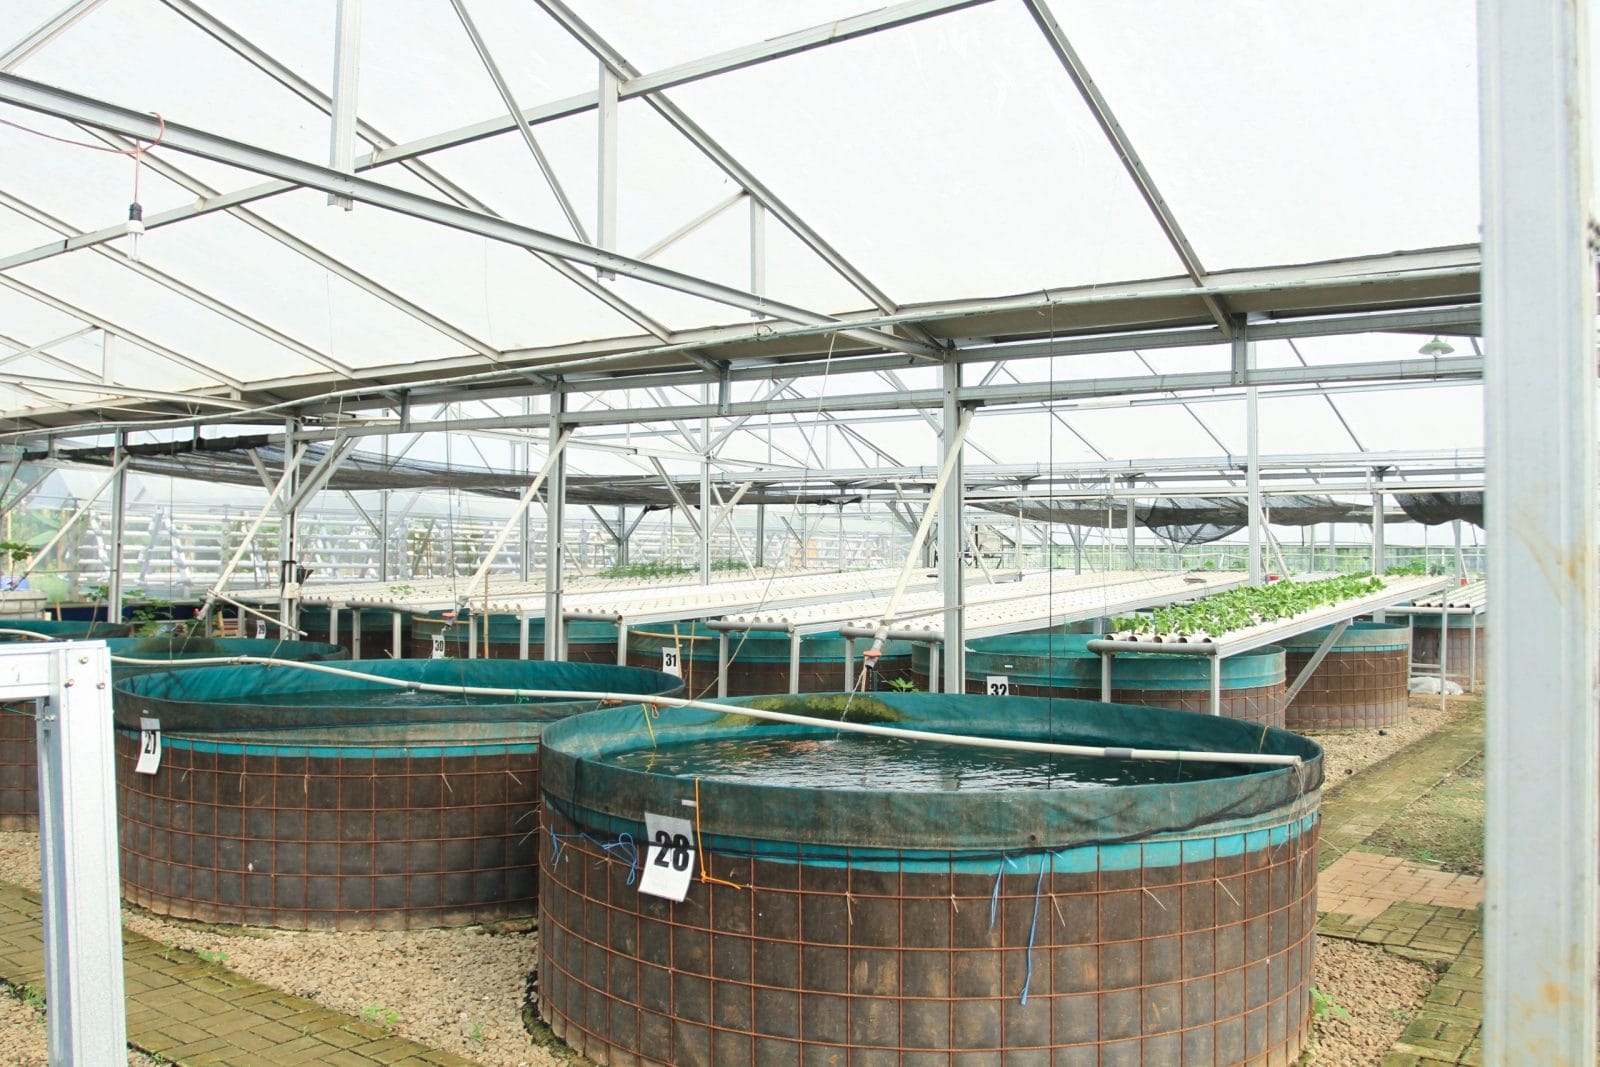 Large tanks with fish at a laboratory